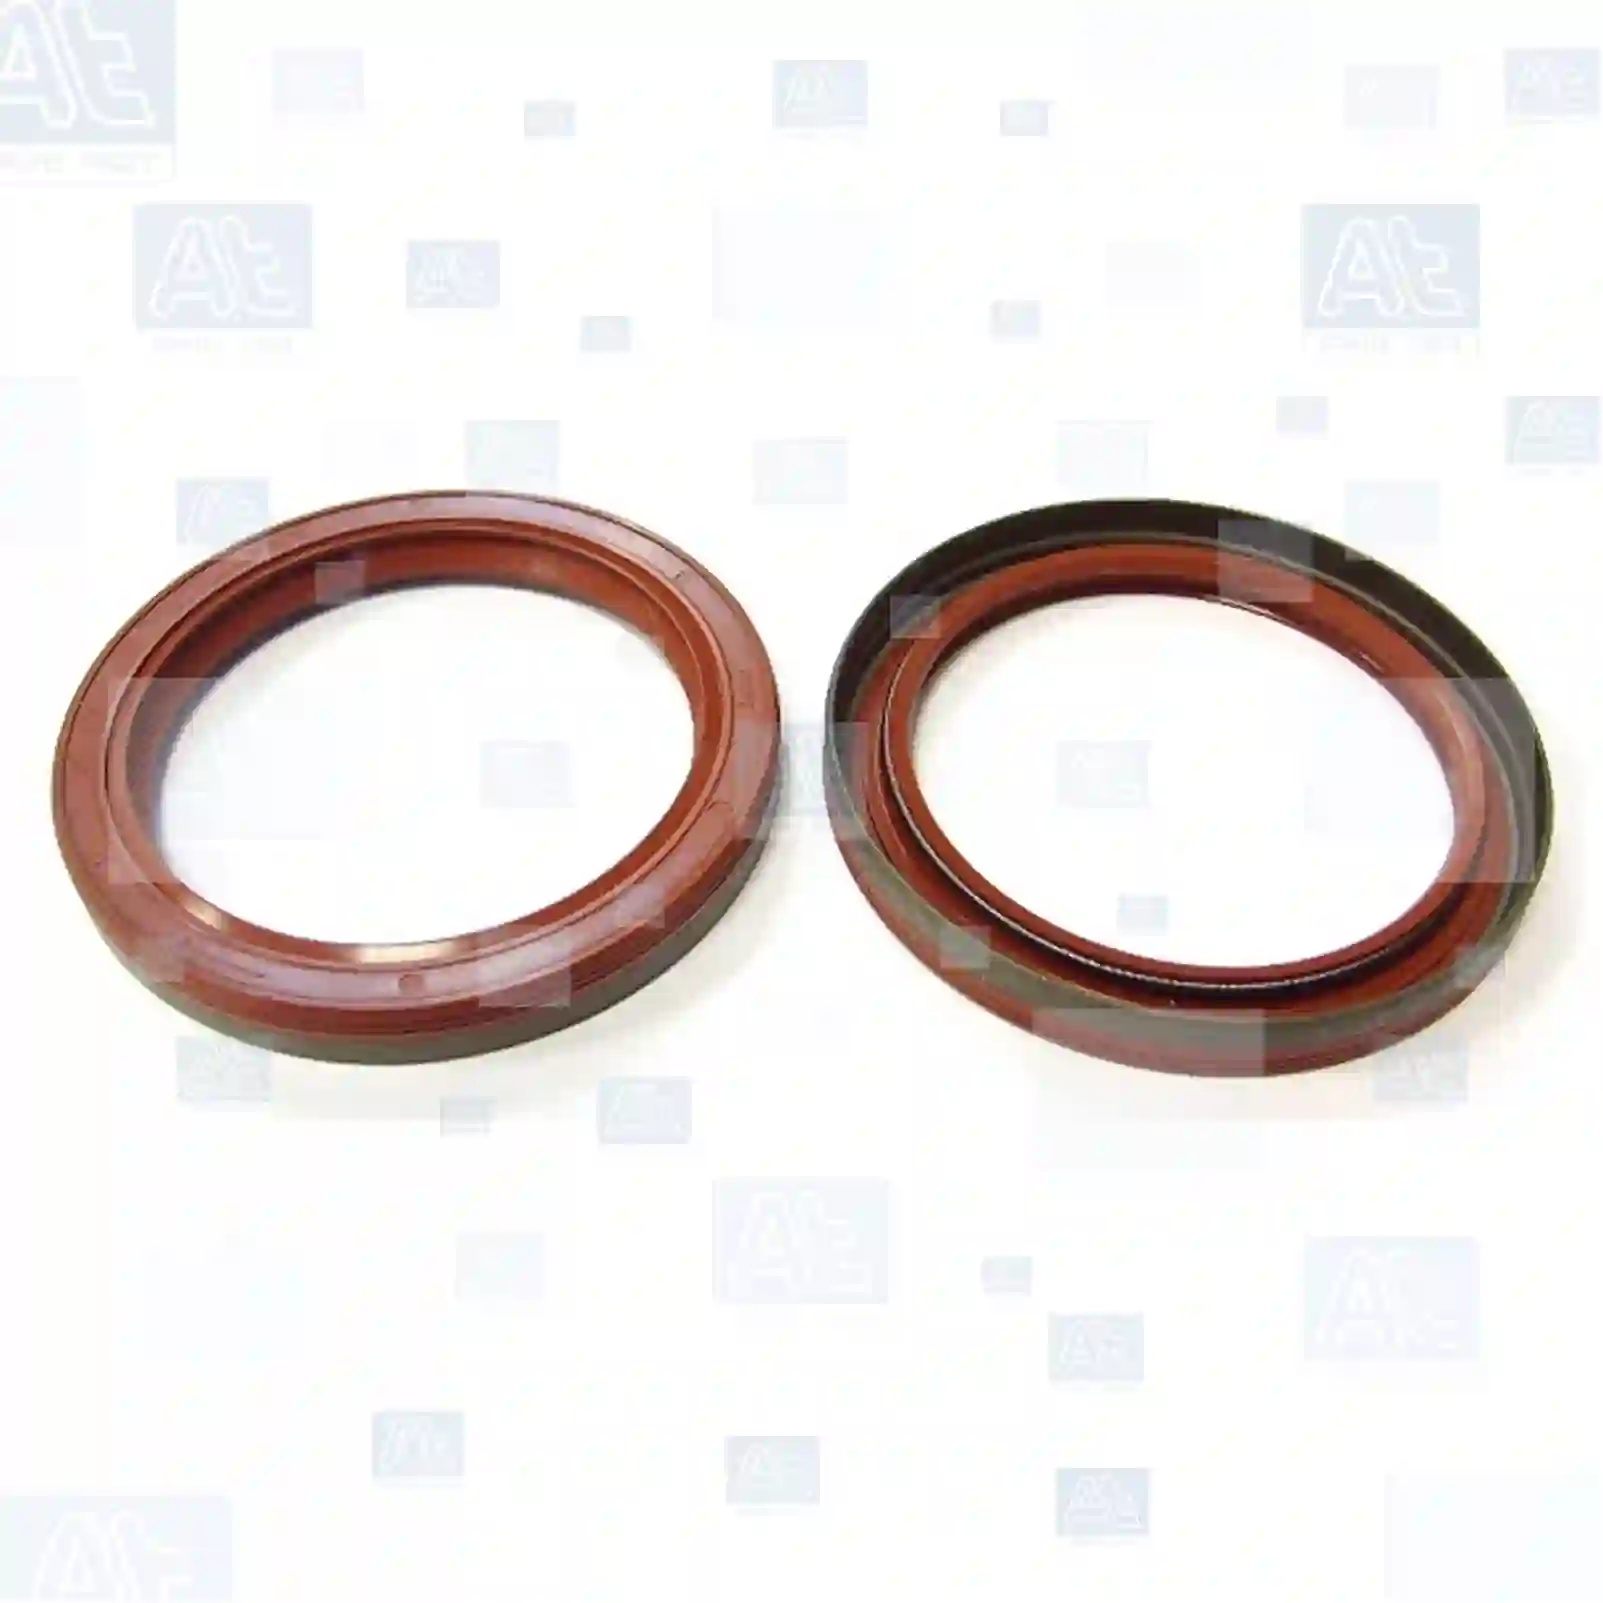 Oil seal, at no 77701246, oem no: 98454041, 080729, 1615787, 07301198, 40003650, 40003657, 40100070, 40100331, 40100334, 5000815434, 98427998, 98428409, 98454041, 99433965, 9111049, 40100331, 42531636, 42562103, 98427998, 98454039, 98454041, 40003650, 40100330, 98428409, 98454041, 06562790359, 4403049, 080729, 5000815434, 5001001254, 5001853924, 7701035740, 7701046541, 7701461930 At Spare Part | Engine, Accelerator Pedal, Camshaft, Connecting Rod, Crankcase, Crankshaft, Cylinder Head, Engine Suspension Mountings, Exhaust Manifold, Exhaust Gas Recirculation, Filter Kits, Flywheel Housing, General Overhaul Kits, Engine, Intake Manifold, Oil Cleaner, Oil Cooler, Oil Filter, Oil Pump, Oil Sump, Piston & Liner, Sensor & Switch, Timing Case, Turbocharger, Cooling System, Belt Tensioner, Coolant Filter, Coolant Pipe, Corrosion Prevention Agent, Drive, Expansion Tank, Fan, Intercooler, Monitors & Gauges, Radiator, Thermostat, V-Belt / Timing belt, Water Pump, Fuel System, Electronical Injector Unit, Feed Pump, Fuel Filter, cpl., Fuel Gauge Sender,  Fuel Line, Fuel Pump, Fuel Tank, Injection Line Kit, Injection Pump, Exhaust System, Clutch & Pedal, Gearbox, Propeller Shaft, Axles, Brake System, Hubs & Wheels, Suspension, Leaf Spring, Universal Parts / Accessories, Steering, Electrical System, Cabin Oil seal, at no 77701246, oem no: 98454041, 080729, 1615787, 07301198, 40003650, 40003657, 40100070, 40100331, 40100334, 5000815434, 98427998, 98428409, 98454041, 99433965, 9111049, 40100331, 42531636, 42562103, 98427998, 98454039, 98454041, 40003650, 40100330, 98428409, 98454041, 06562790359, 4403049, 080729, 5000815434, 5001001254, 5001853924, 7701035740, 7701046541, 7701461930 At Spare Part | Engine, Accelerator Pedal, Camshaft, Connecting Rod, Crankcase, Crankshaft, Cylinder Head, Engine Suspension Mountings, Exhaust Manifold, Exhaust Gas Recirculation, Filter Kits, Flywheel Housing, General Overhaul Kits, Engine, Intake Manifold, Oil Cleaner, Oil Cooler, Oil Filter, Oil Pump, Oil Sump, Piston & Liner, Sensor & Switch, Timing Case, Turbocharger, Cooling System, Belt Tensioner, Coolant Filter, Coolant Pipe, Corrosion Prevention Agent, Drive, Expansion Tank, Fan, Intercooler, Monitors & Gauges, Radiator, Thermostat, V-Belt / Timing belt, Water Pump, Fuel System, Electronical Injector Unit, Feed Pump, Fuel Filter, cpl., Fuel Gauge Sender,  Fuel Line, Fuel Pump, Fuel Tank, Injection Line Kit, Injection Pump, Exhaust System, Clutch & Pedal, Gearbox, Propeller Shaft, Axles, Brake System, Hubs & Wheels, Suspension, Leaf Spring, Universal Parts / Accessories, Steering, Electrical System, Cabin